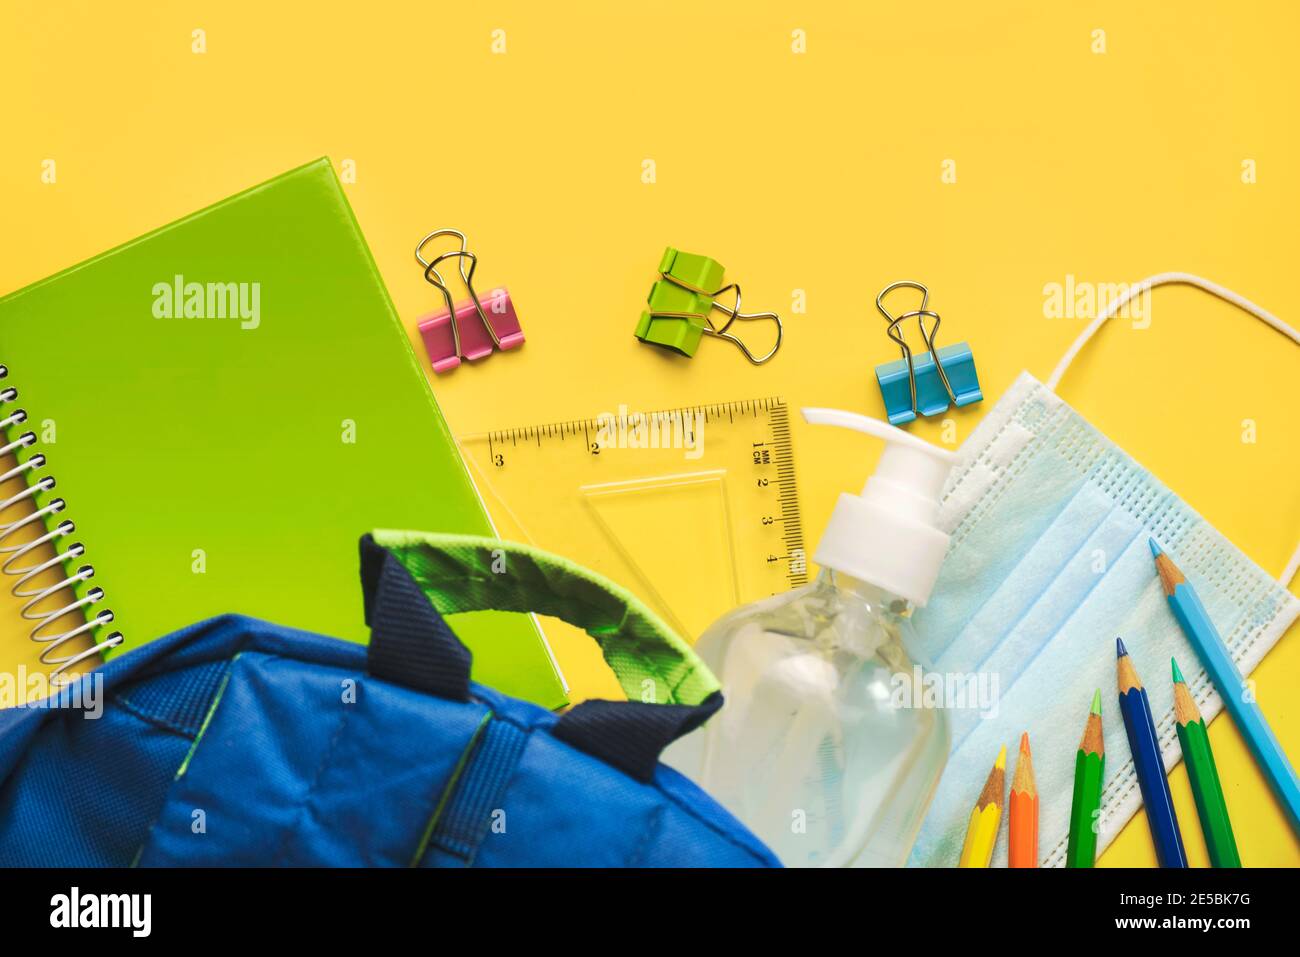 School supplies with medical mask and sanitizer bottle on yellow background.Selective focus Stock Photo